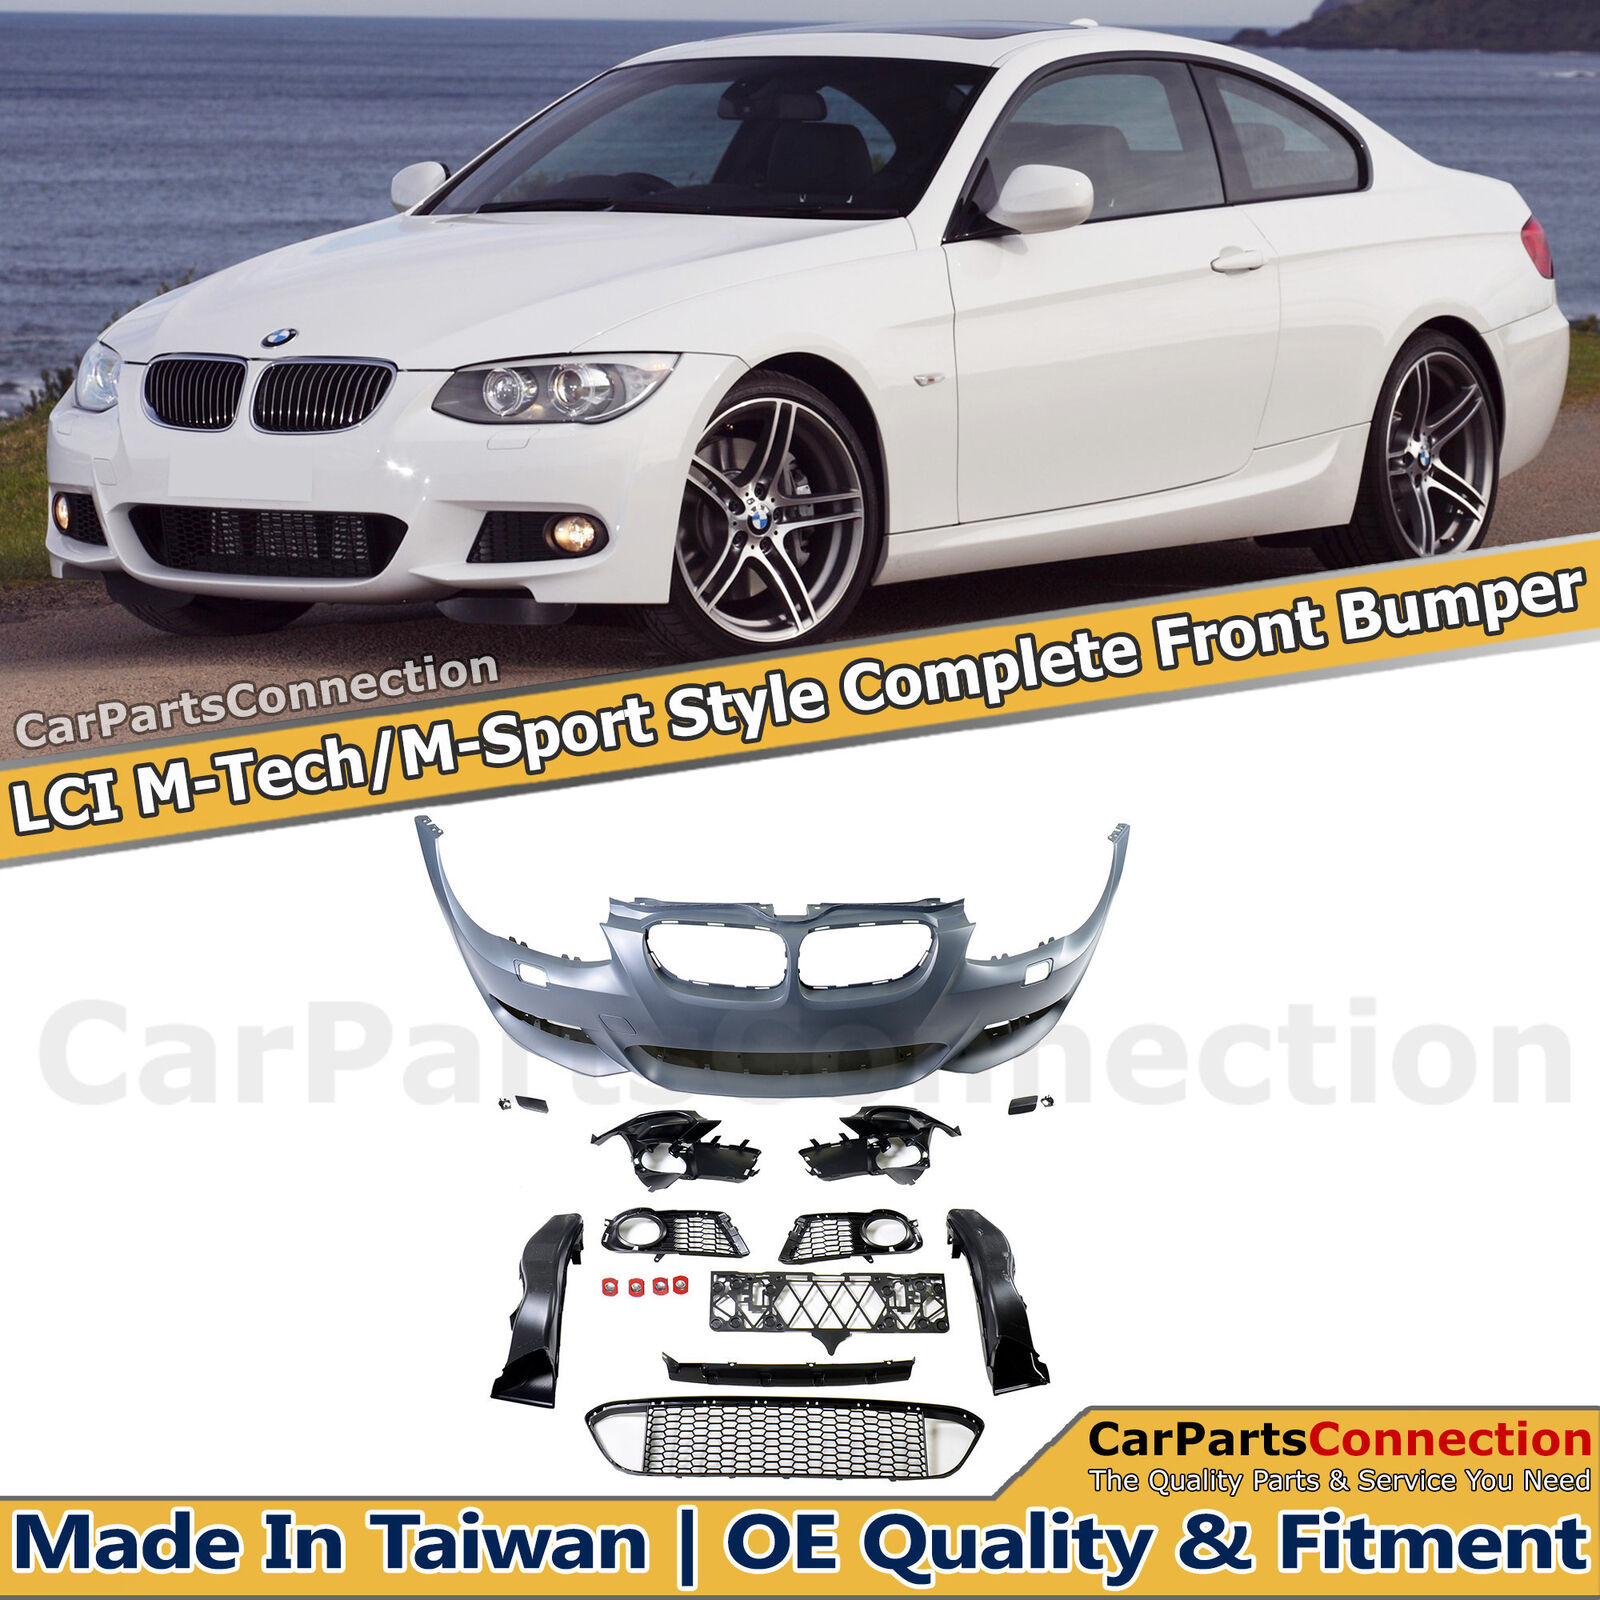 M-Sport Style Front Bumper Cover Kit For BMW E92 3-Series Coupe 2011-2013 328i